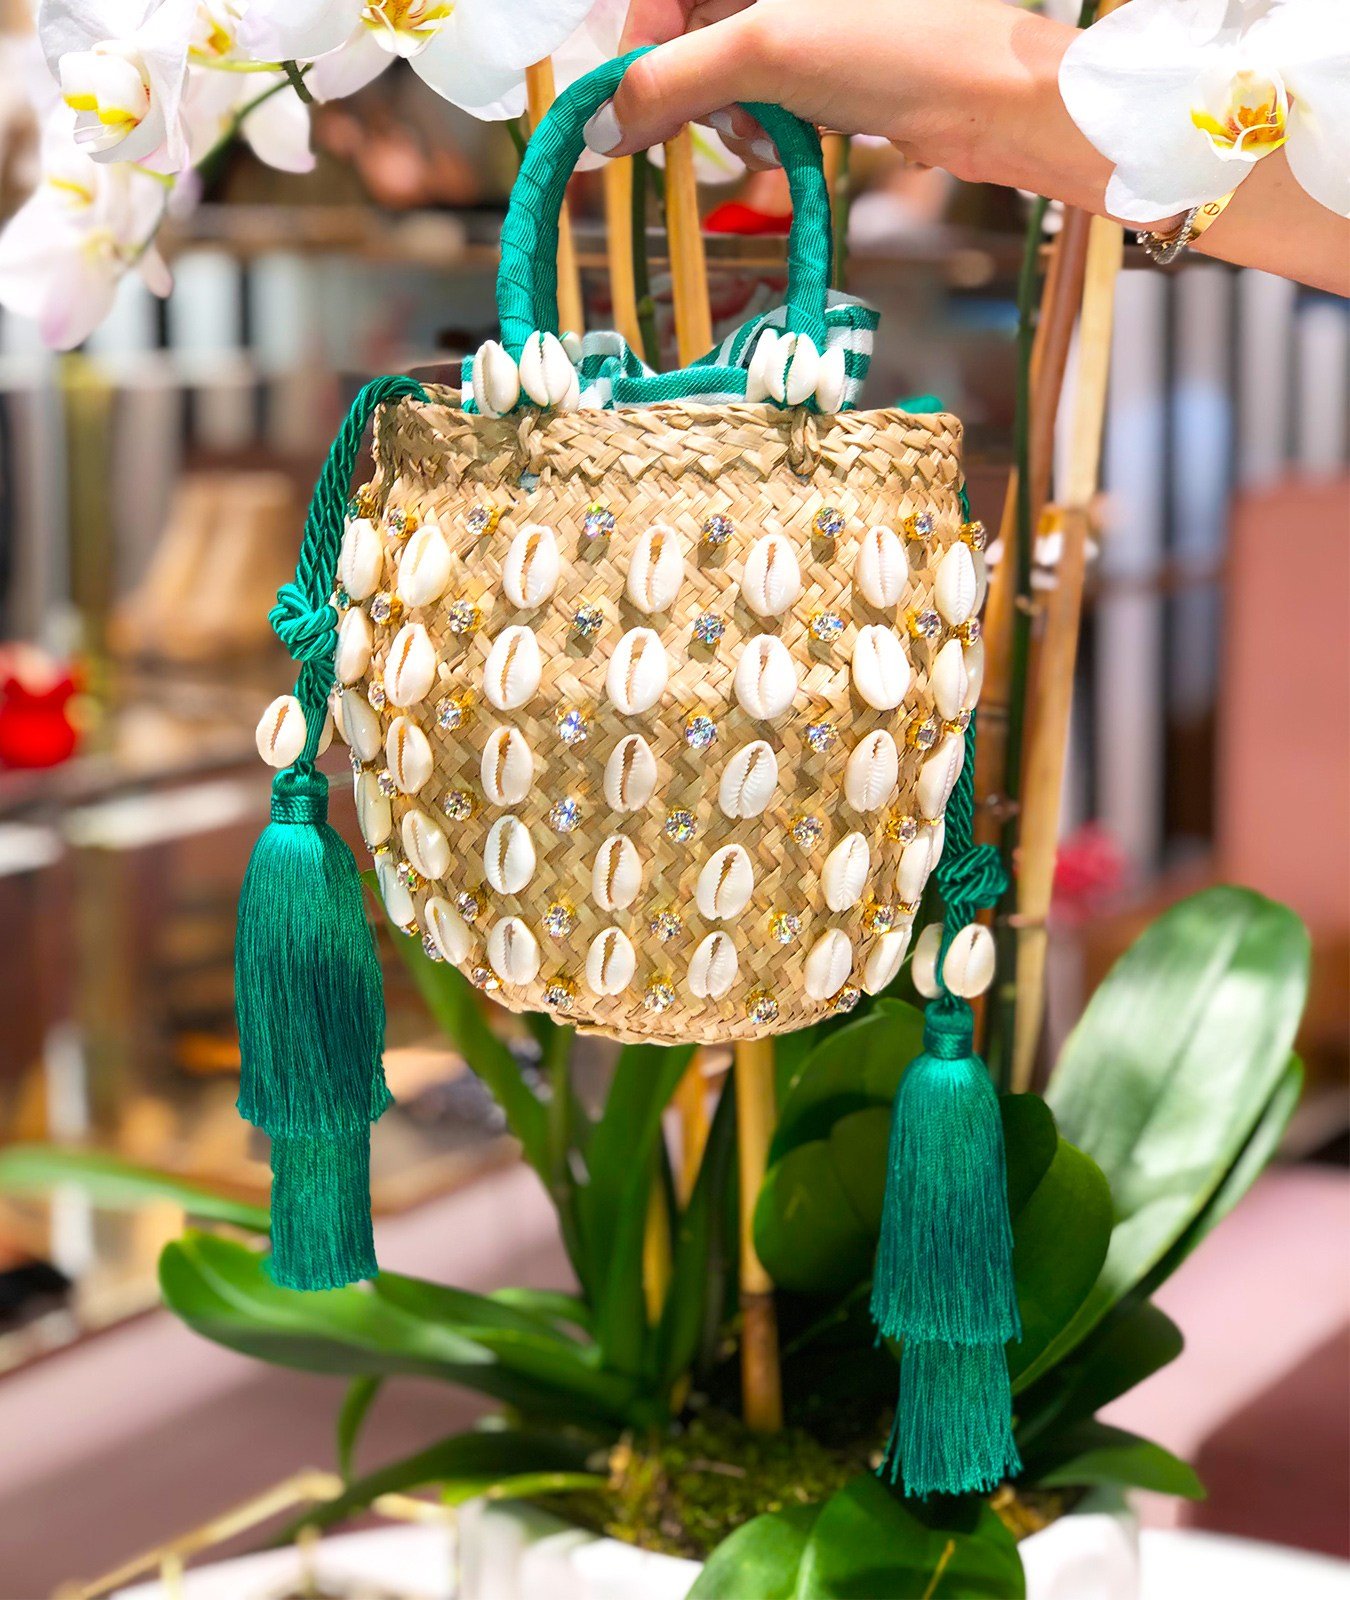 The Aquazzura Riviera bag is one of the styles created in collaboration with Le Ninè for the Escapes Capsule Collection. Hand-crafted from natural raffia, embellished with tropical cowrie shells, eye-catching crystals and swingy tassel